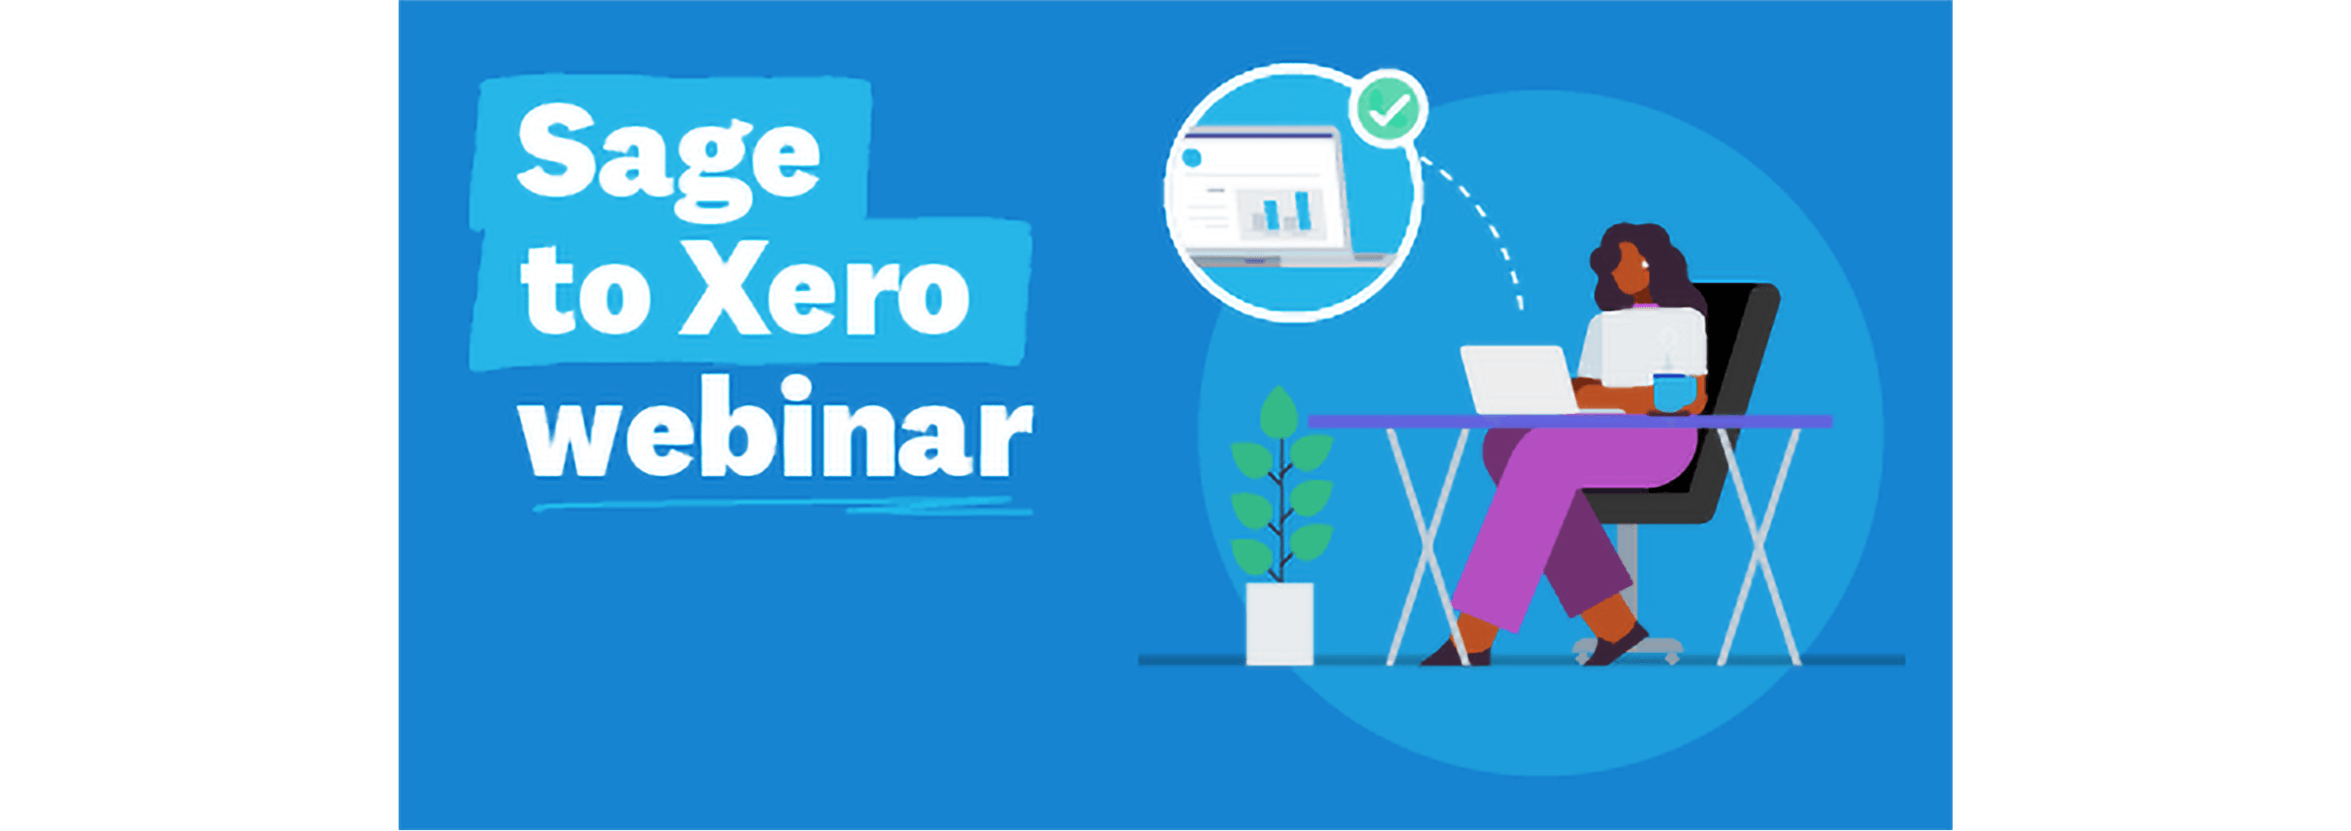 A Sage user watches the webinar on how to convert to Xero.